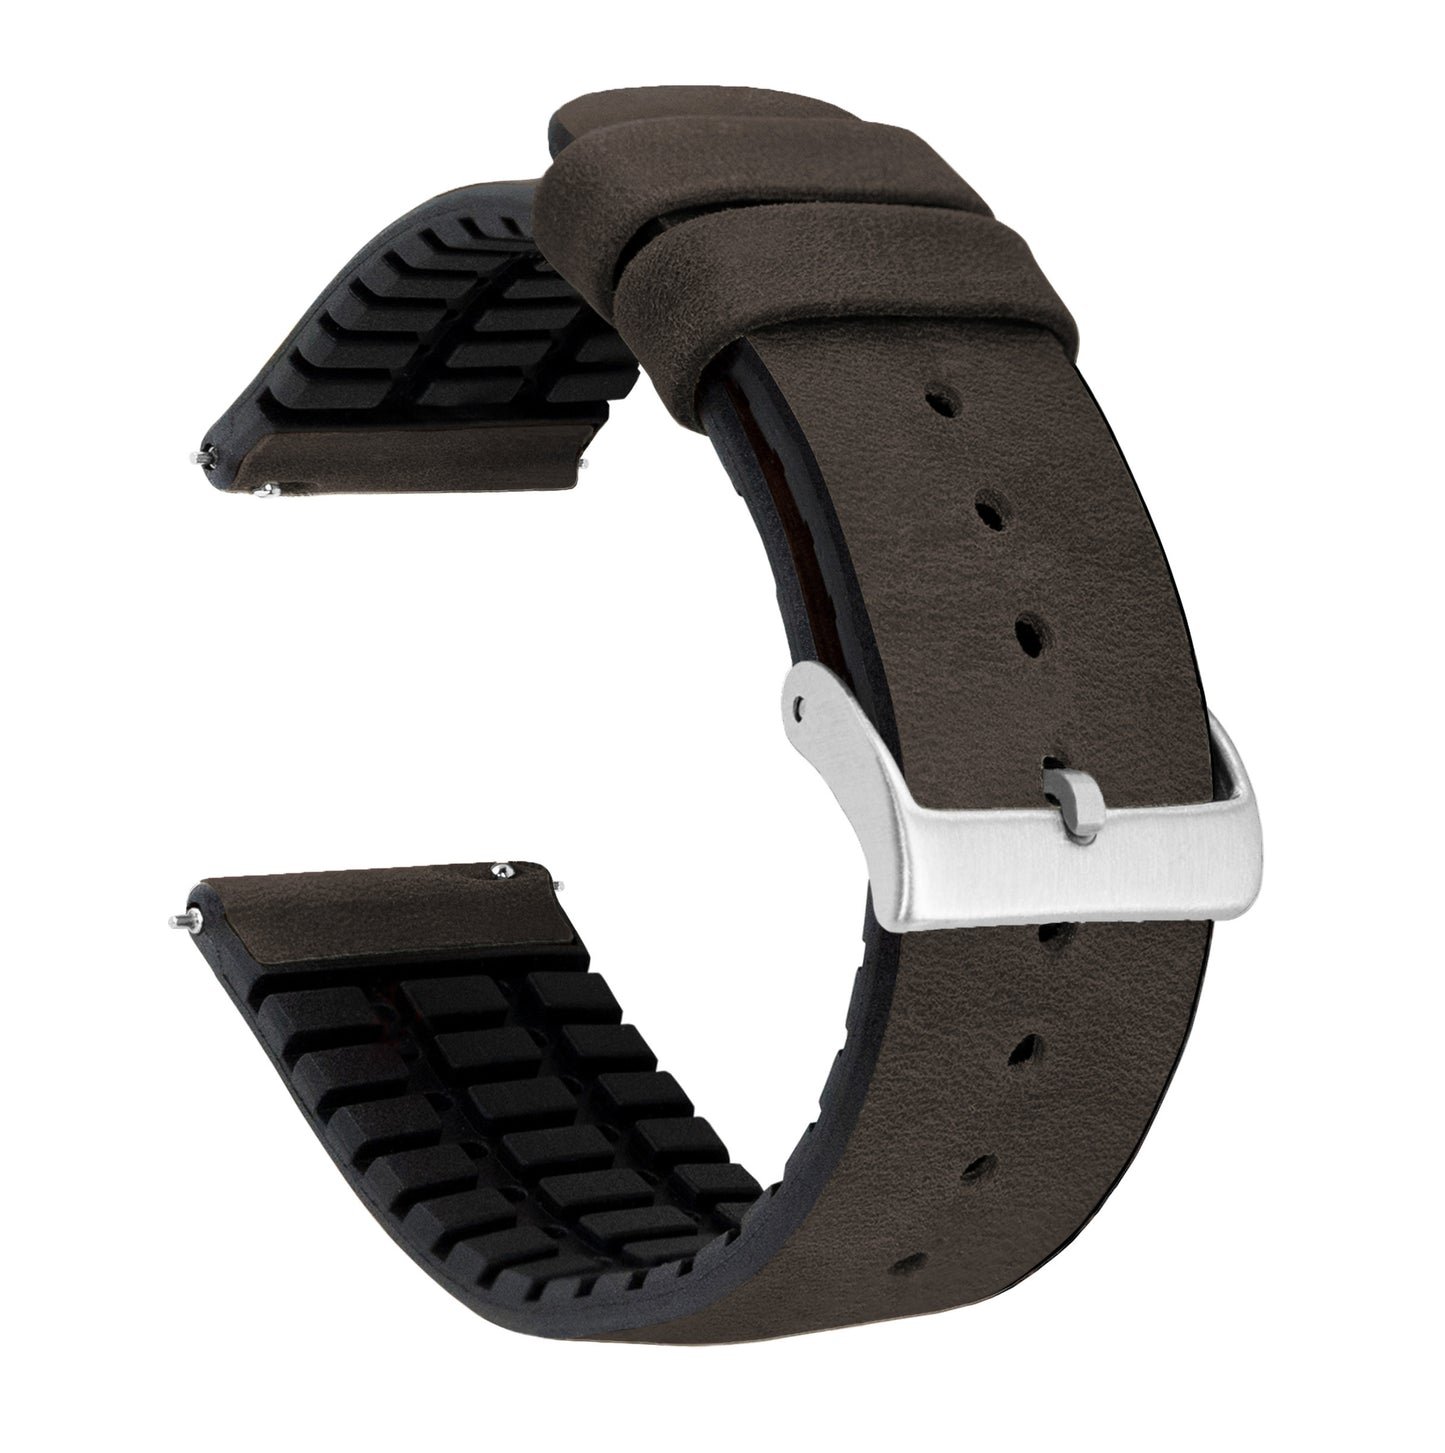 Fossil Gen 5 | Leather and Rubber Hybrid | Smoke Brown - Barton Watch Bands